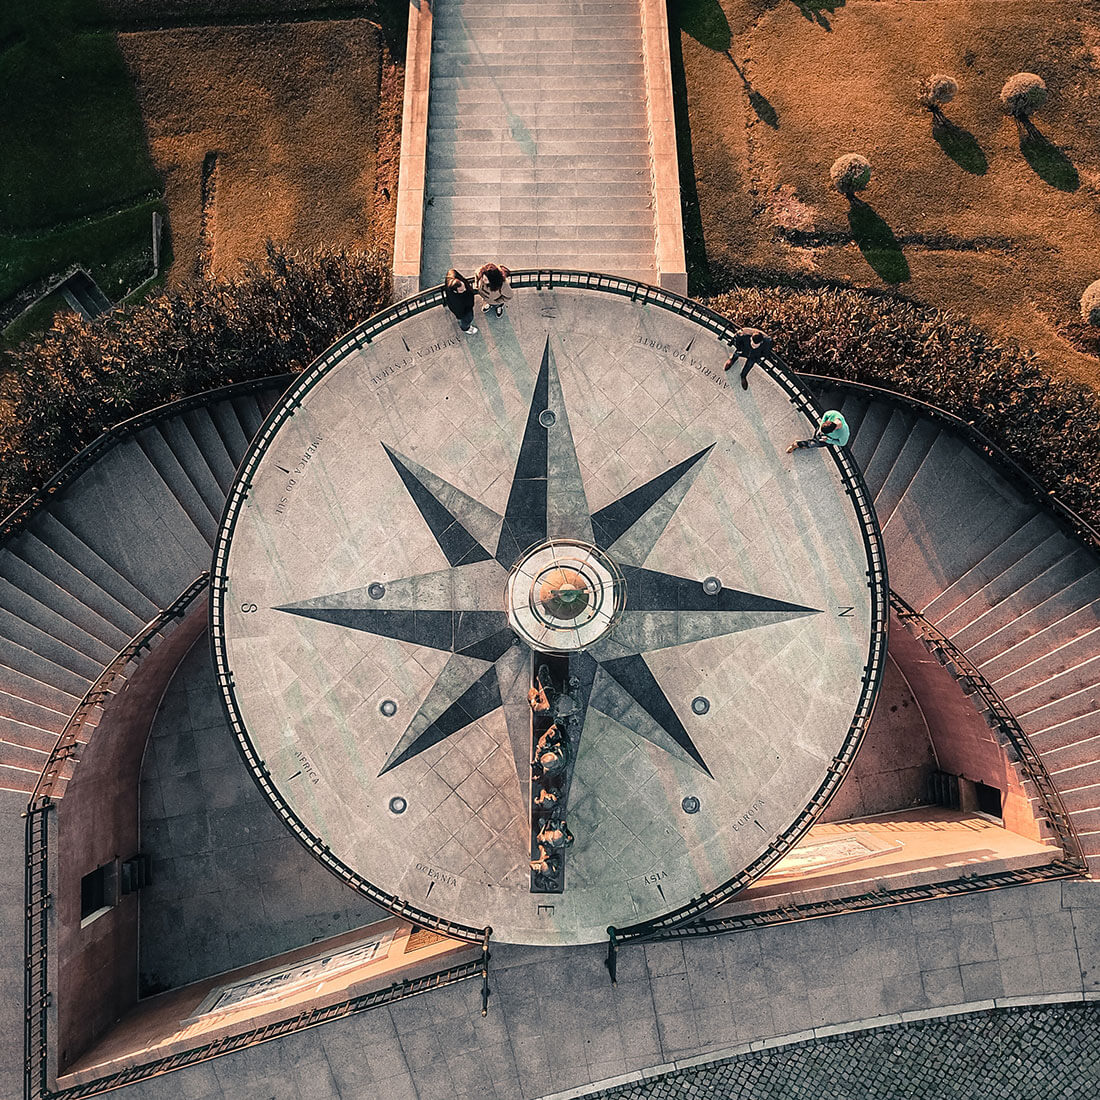 Photo looking down upon an observation deck with a compass design on the ground